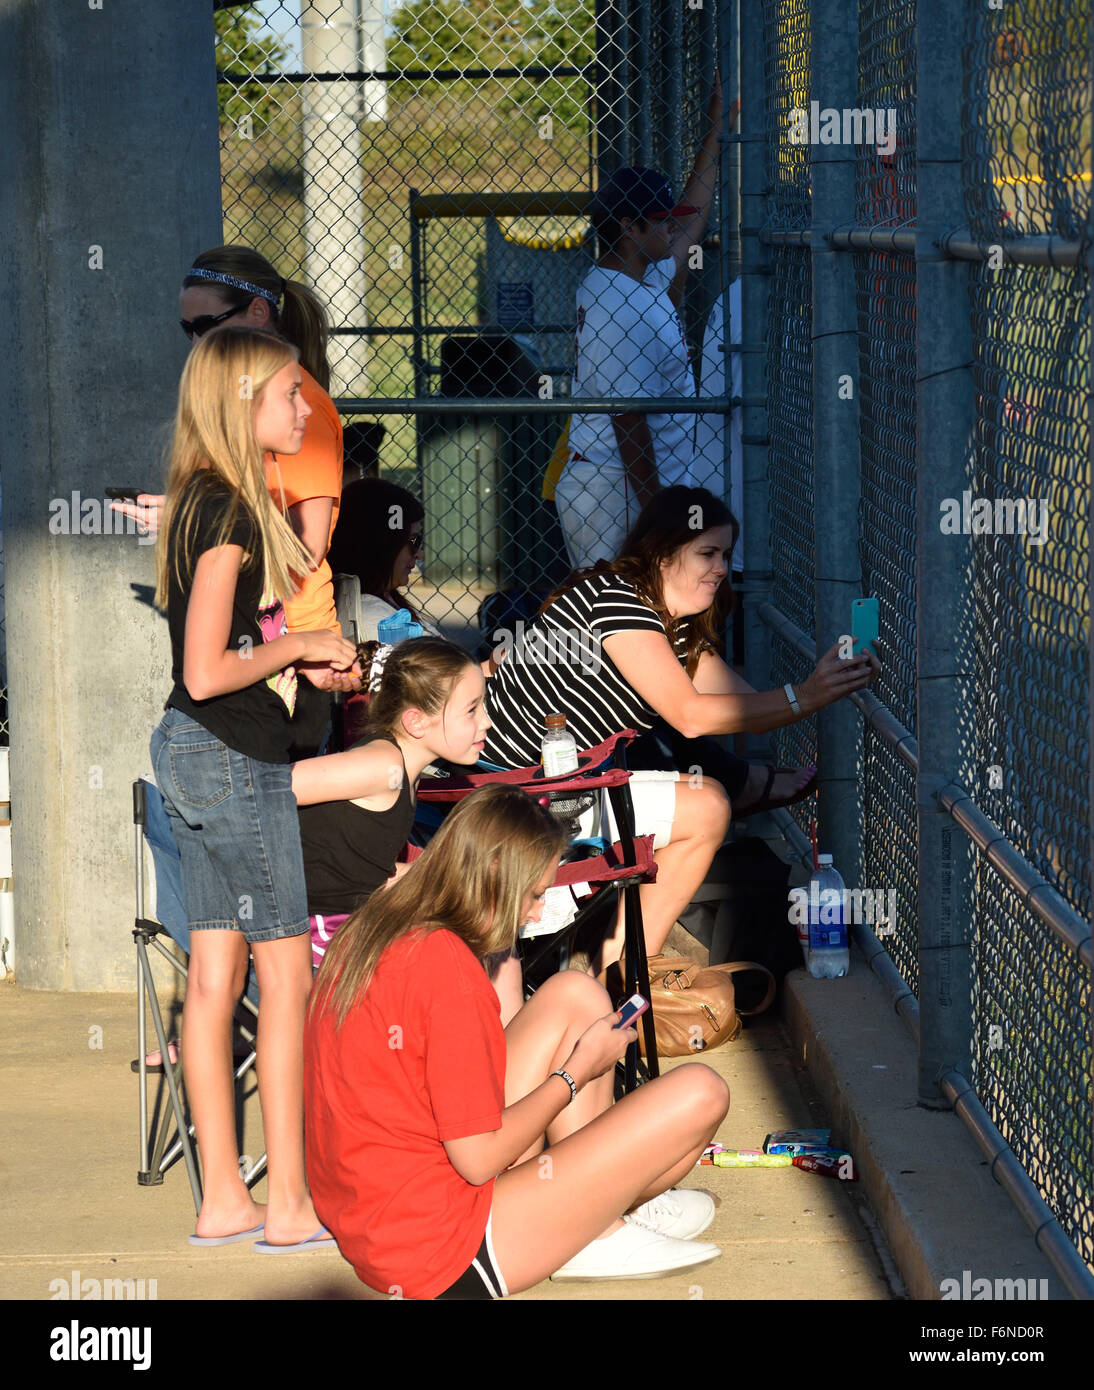 Girls at a baseball game and each has their own mobile device out. Stock Photo